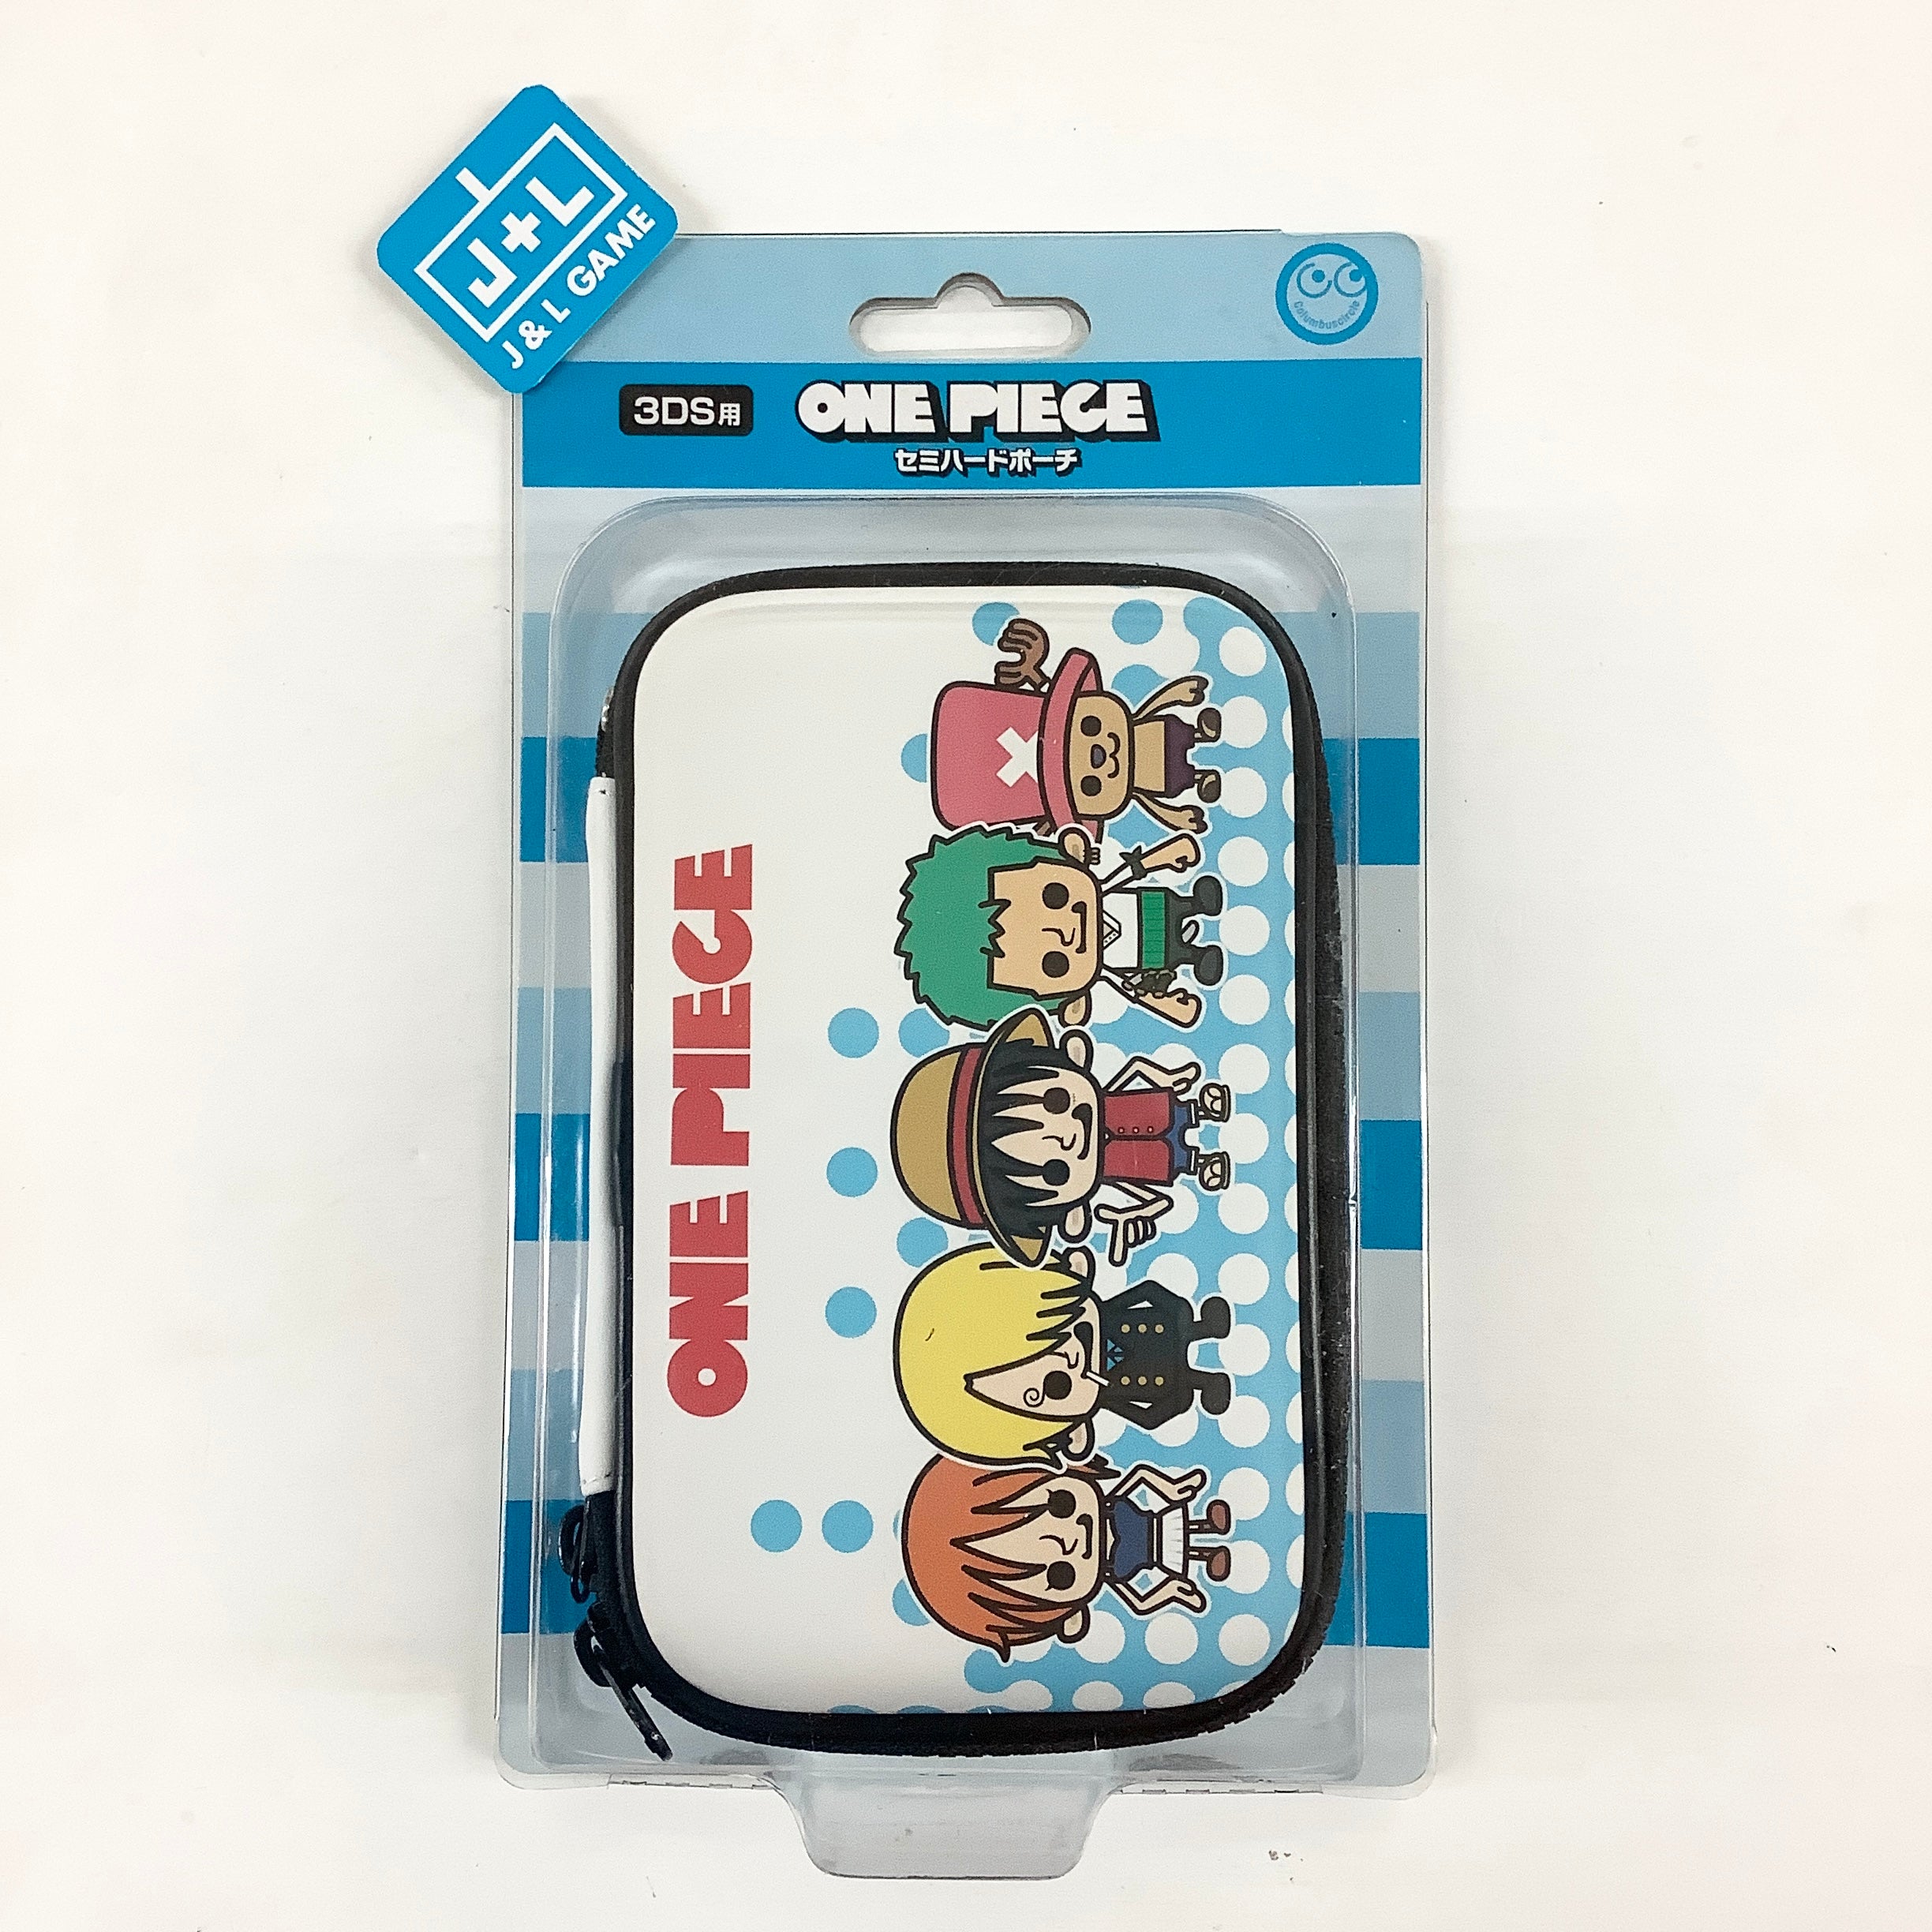 Nintendo 3DS One Piece Carrying Case - Nintendo 3DS Accessories One piece   